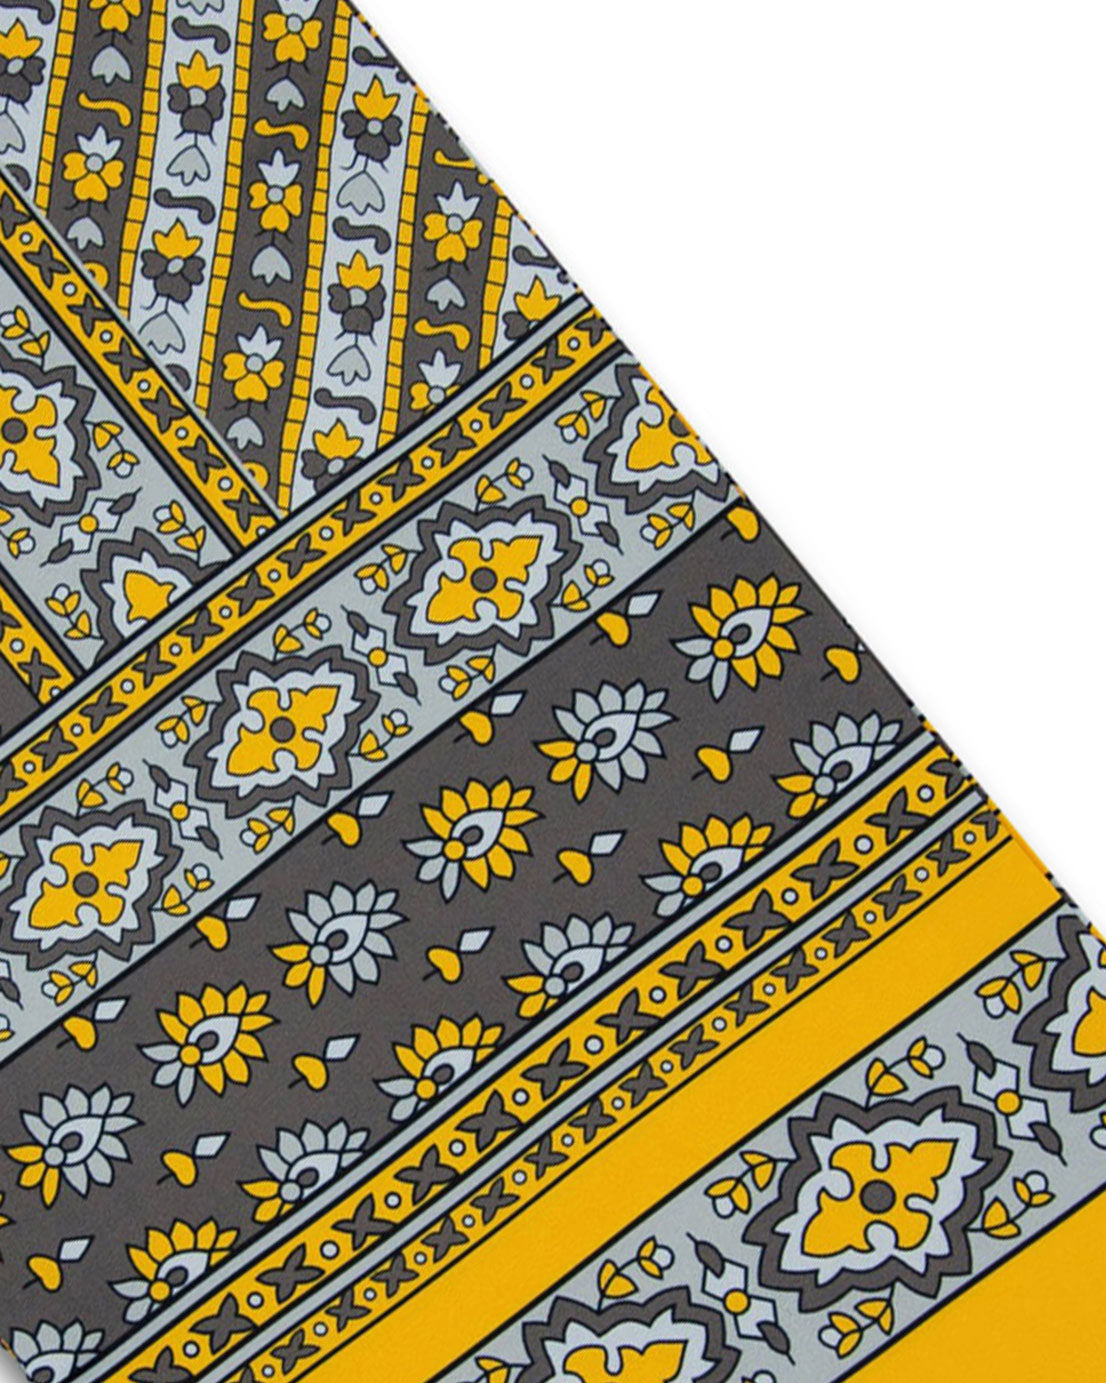 Angled view of the patterned silk and wool wide scarf, presenting a closer view of the decorative and floral-inspired patterns in yellow, grey and silver.